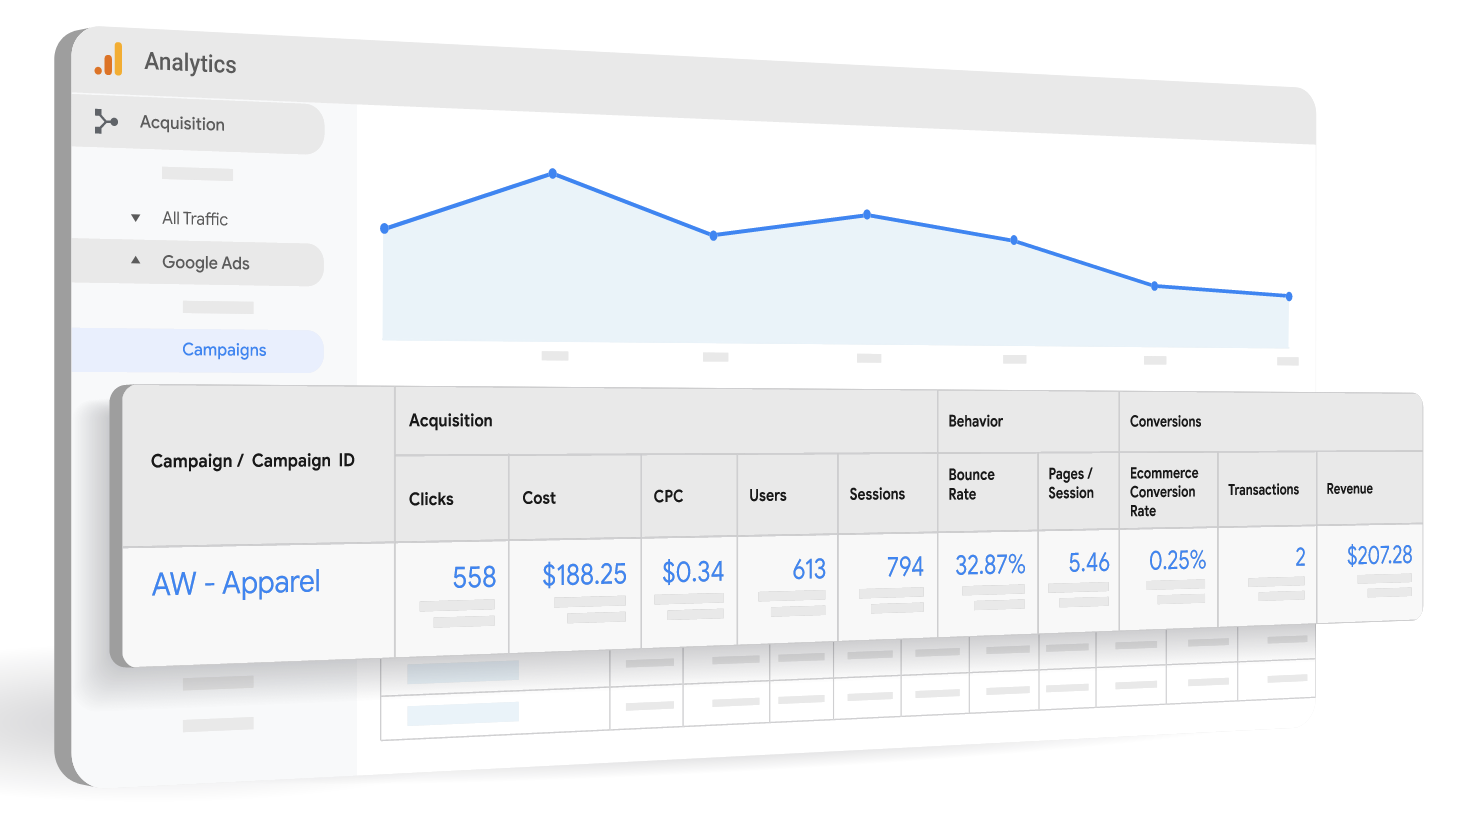 How to link Google Analytics with Google Ads?